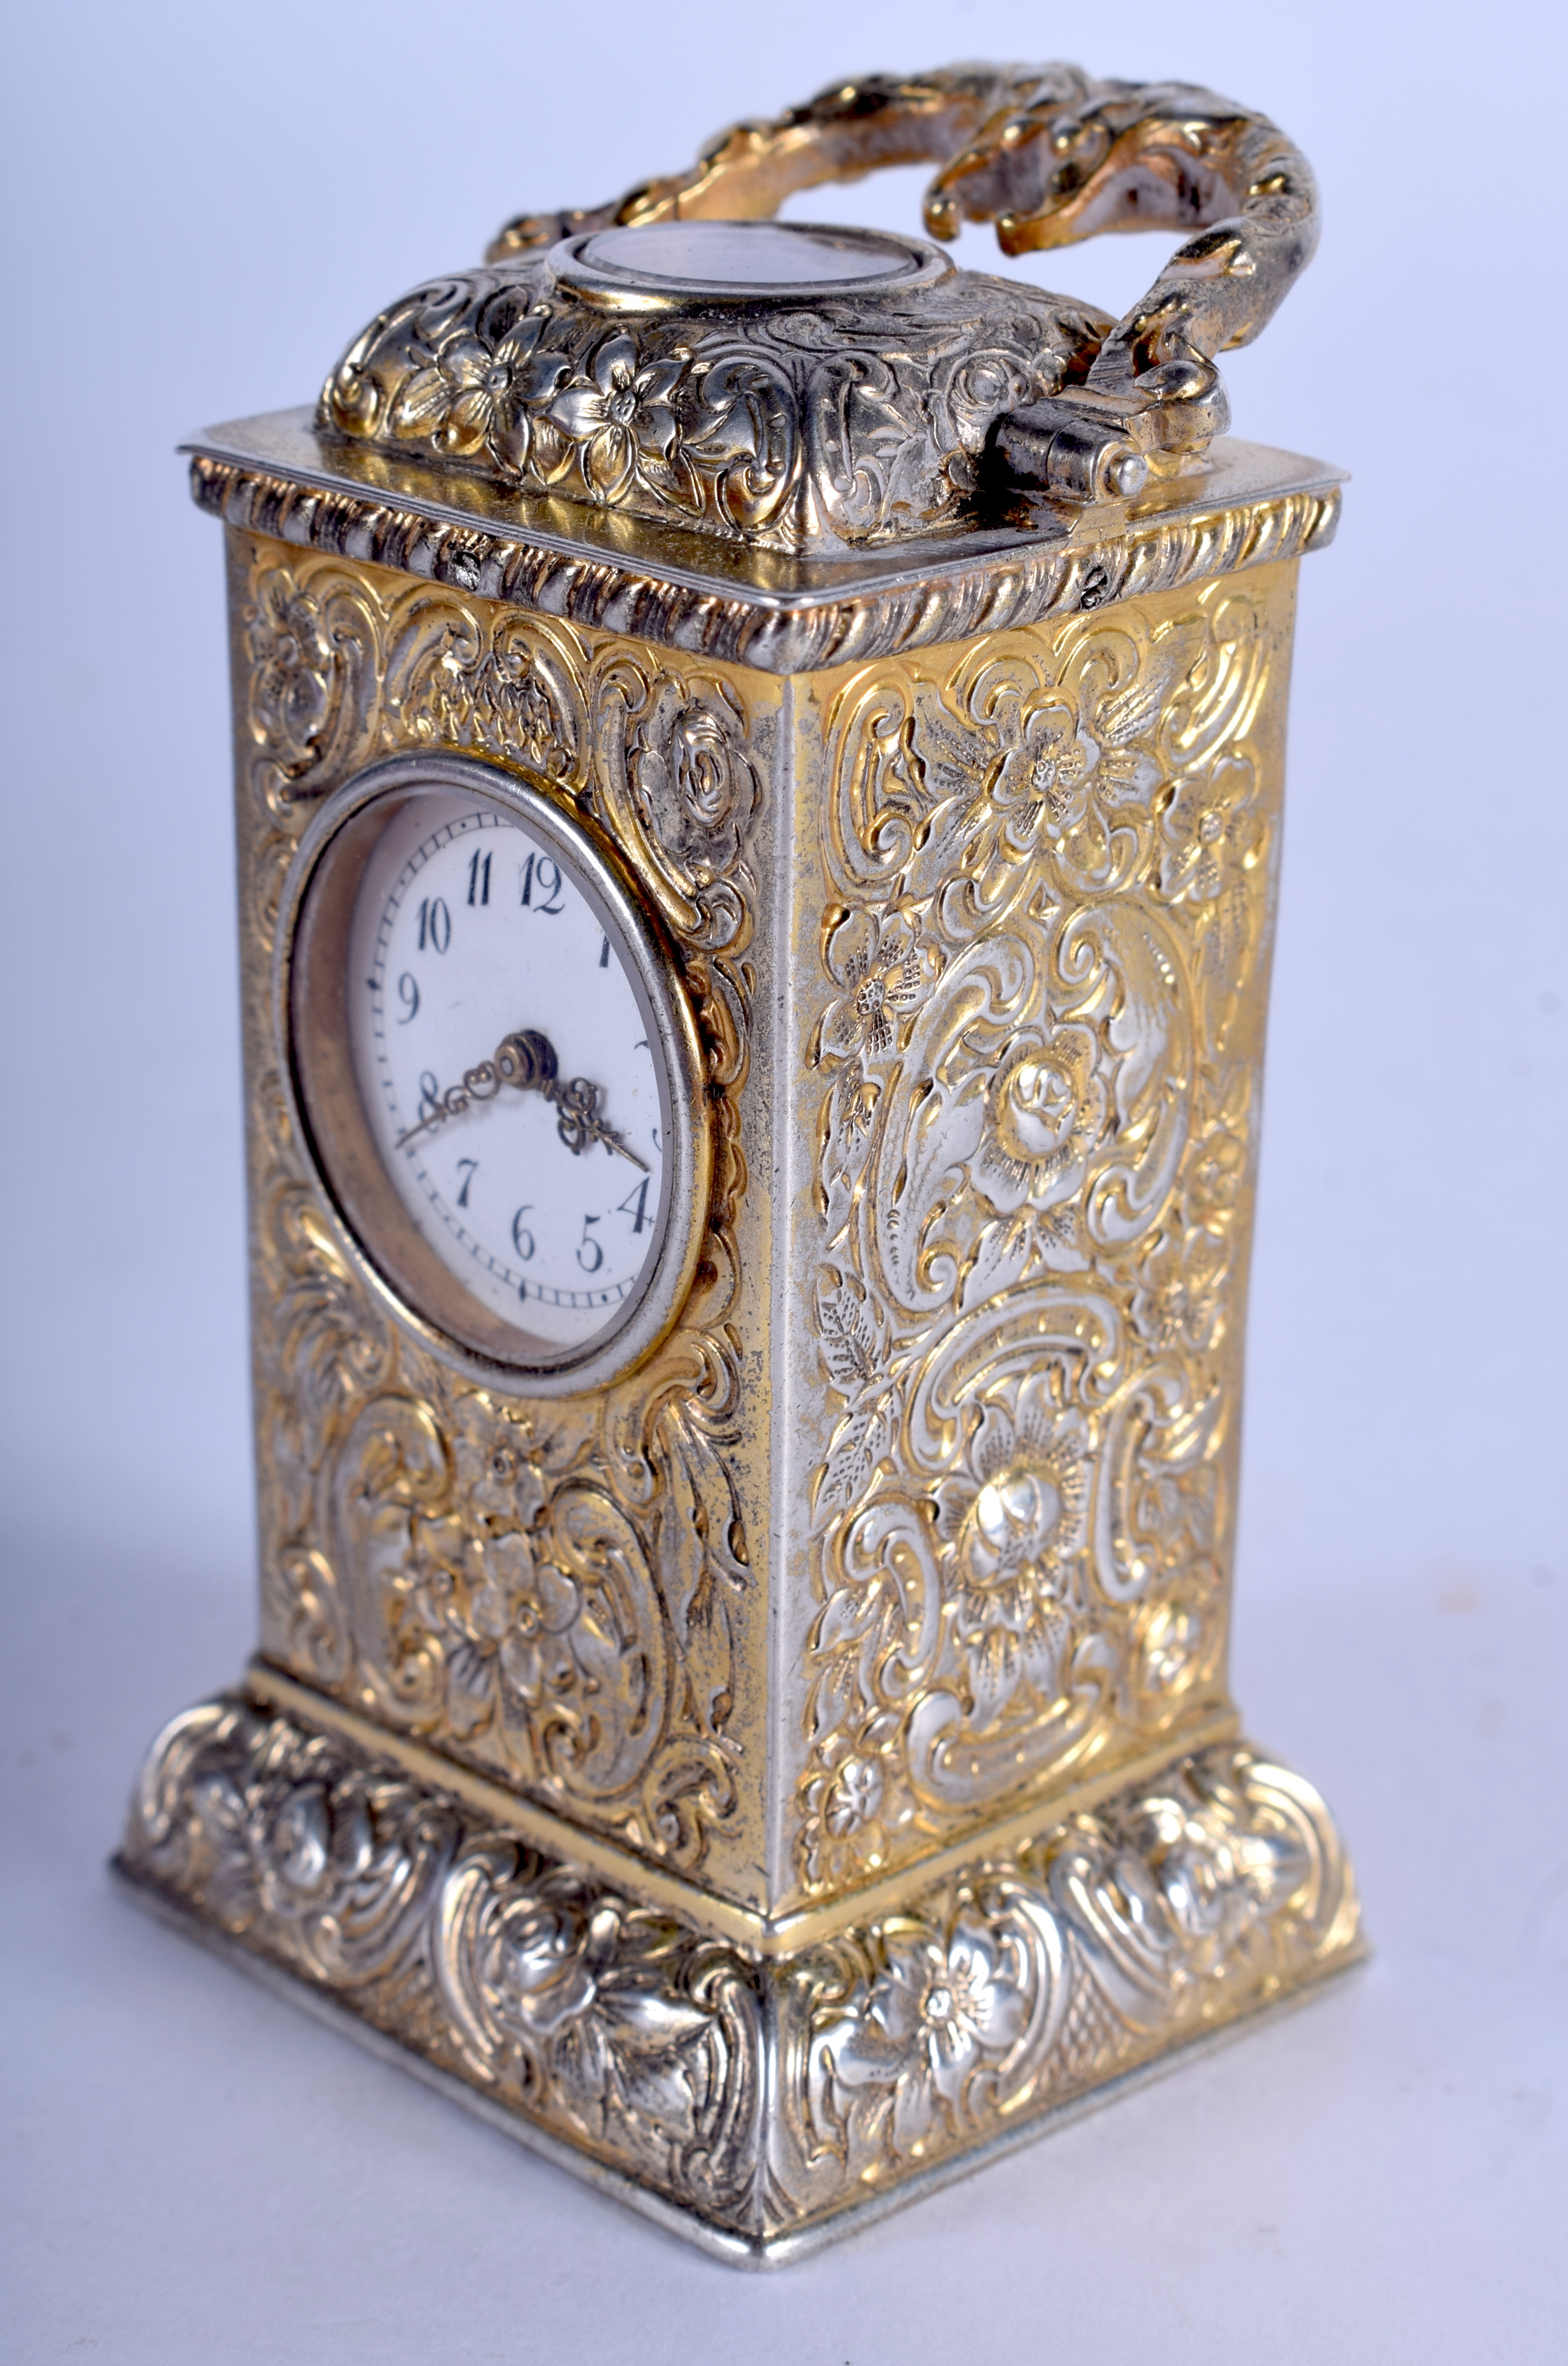 A LOVELY ANTIQUE MINIATURE TRAVELLING SILVER GILT CLOCK decorated with foliage and vines. 8.75 cm hi - Image 3 of 8